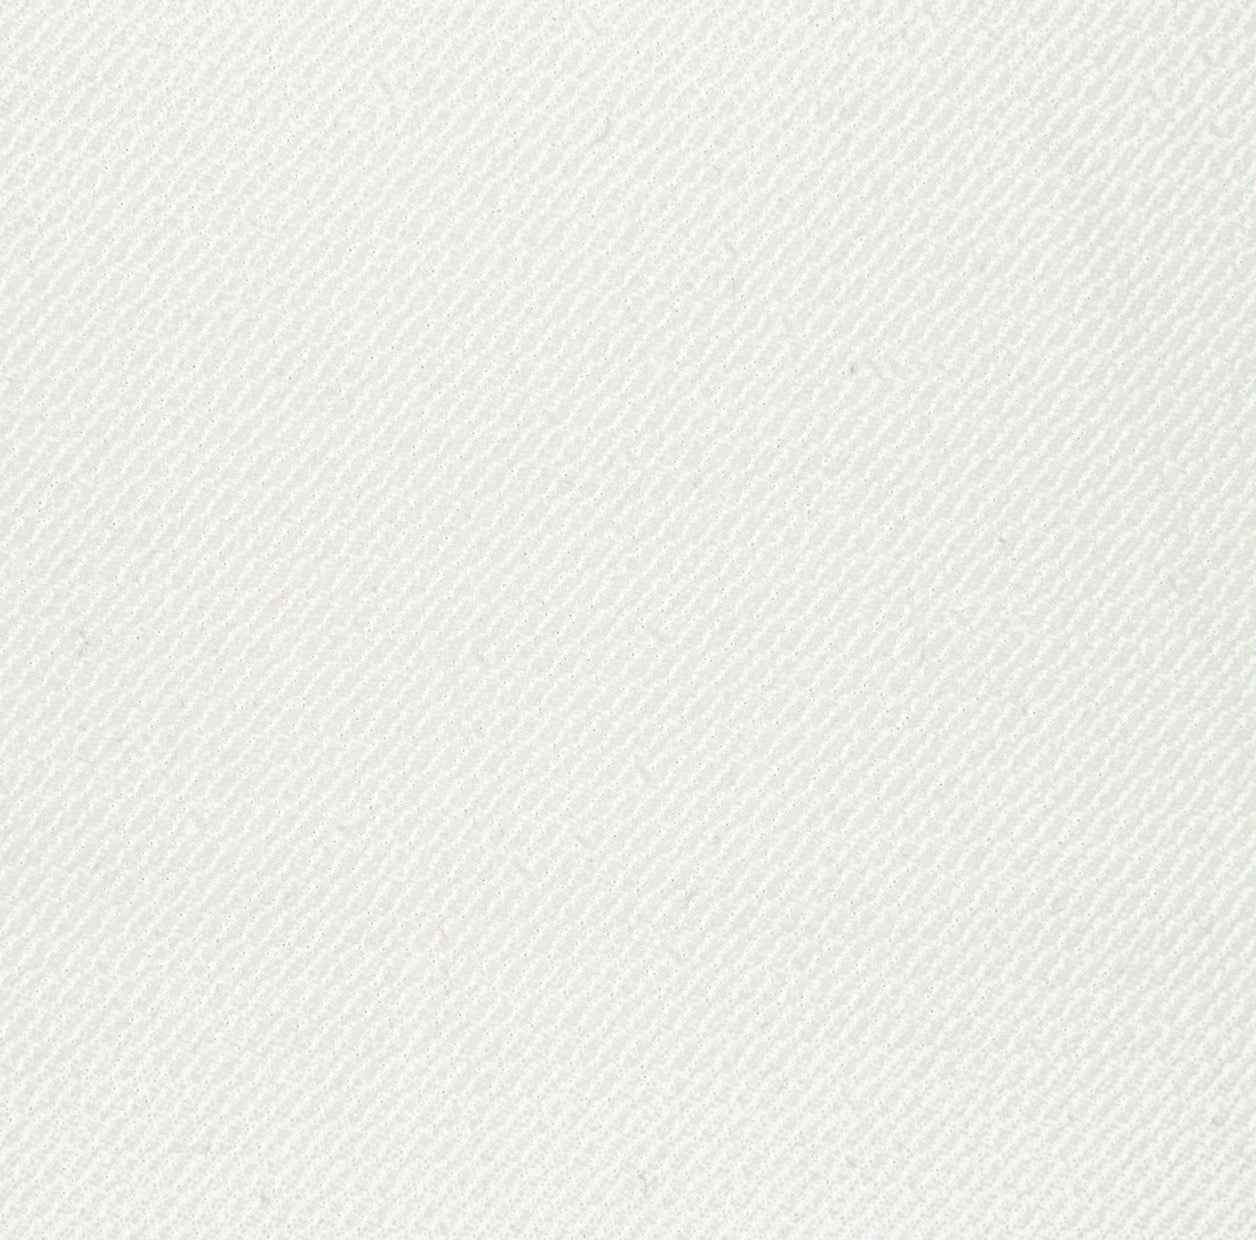 35005-12 Ivory Polyester Plain Dyed 280g/yd 54" beige plain dyed polyester woven Solid Color - knit fabric - woven fabric - fabric company - fabric wholesale - fabric b2b - fabric factory - high quality fabric - hong kong fabric - fabric hk - acetate fabric - cotton fabric - linen fabric - metallic fabric - nylon fabric - polyester fabric - spandex fabric - chun wing hing - cwh hk - fabric worldwide ship - 針織布 - 梳織布 - 布料公司- 布料批發 - 香港布料 - 秦榮興